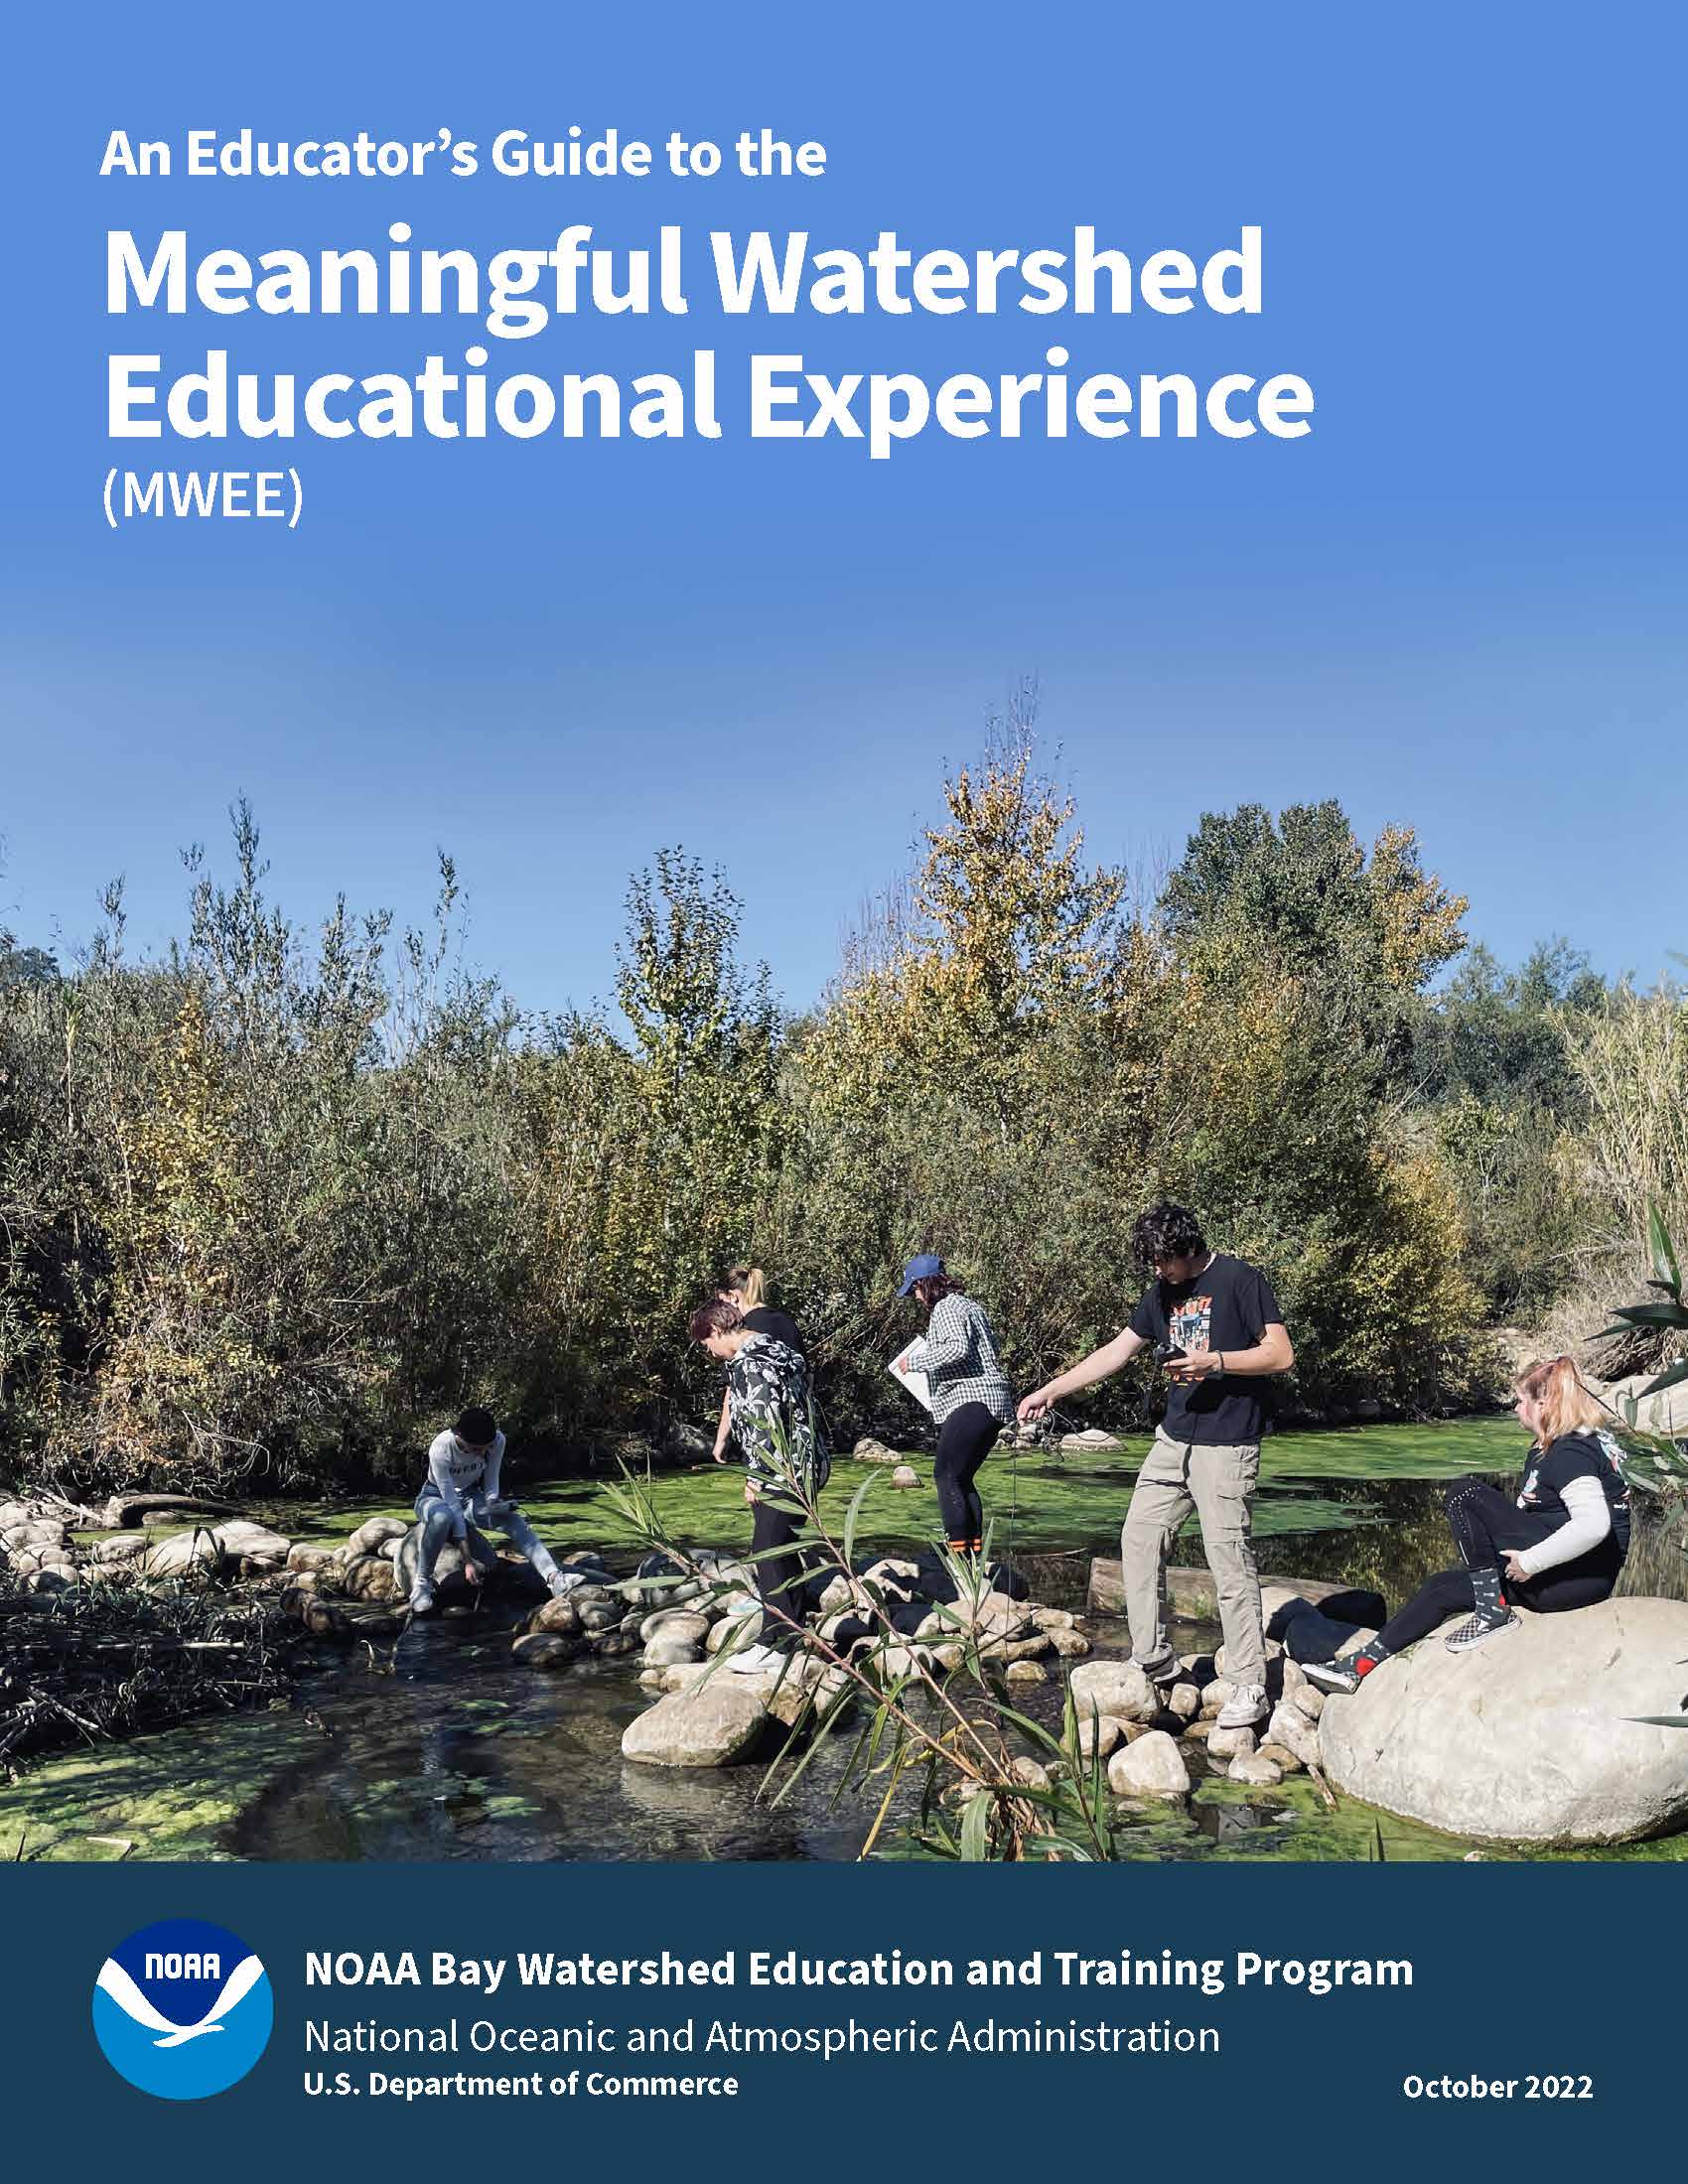 Cover of the Educator's Guide to the Meaningful Watershed Educational Experience